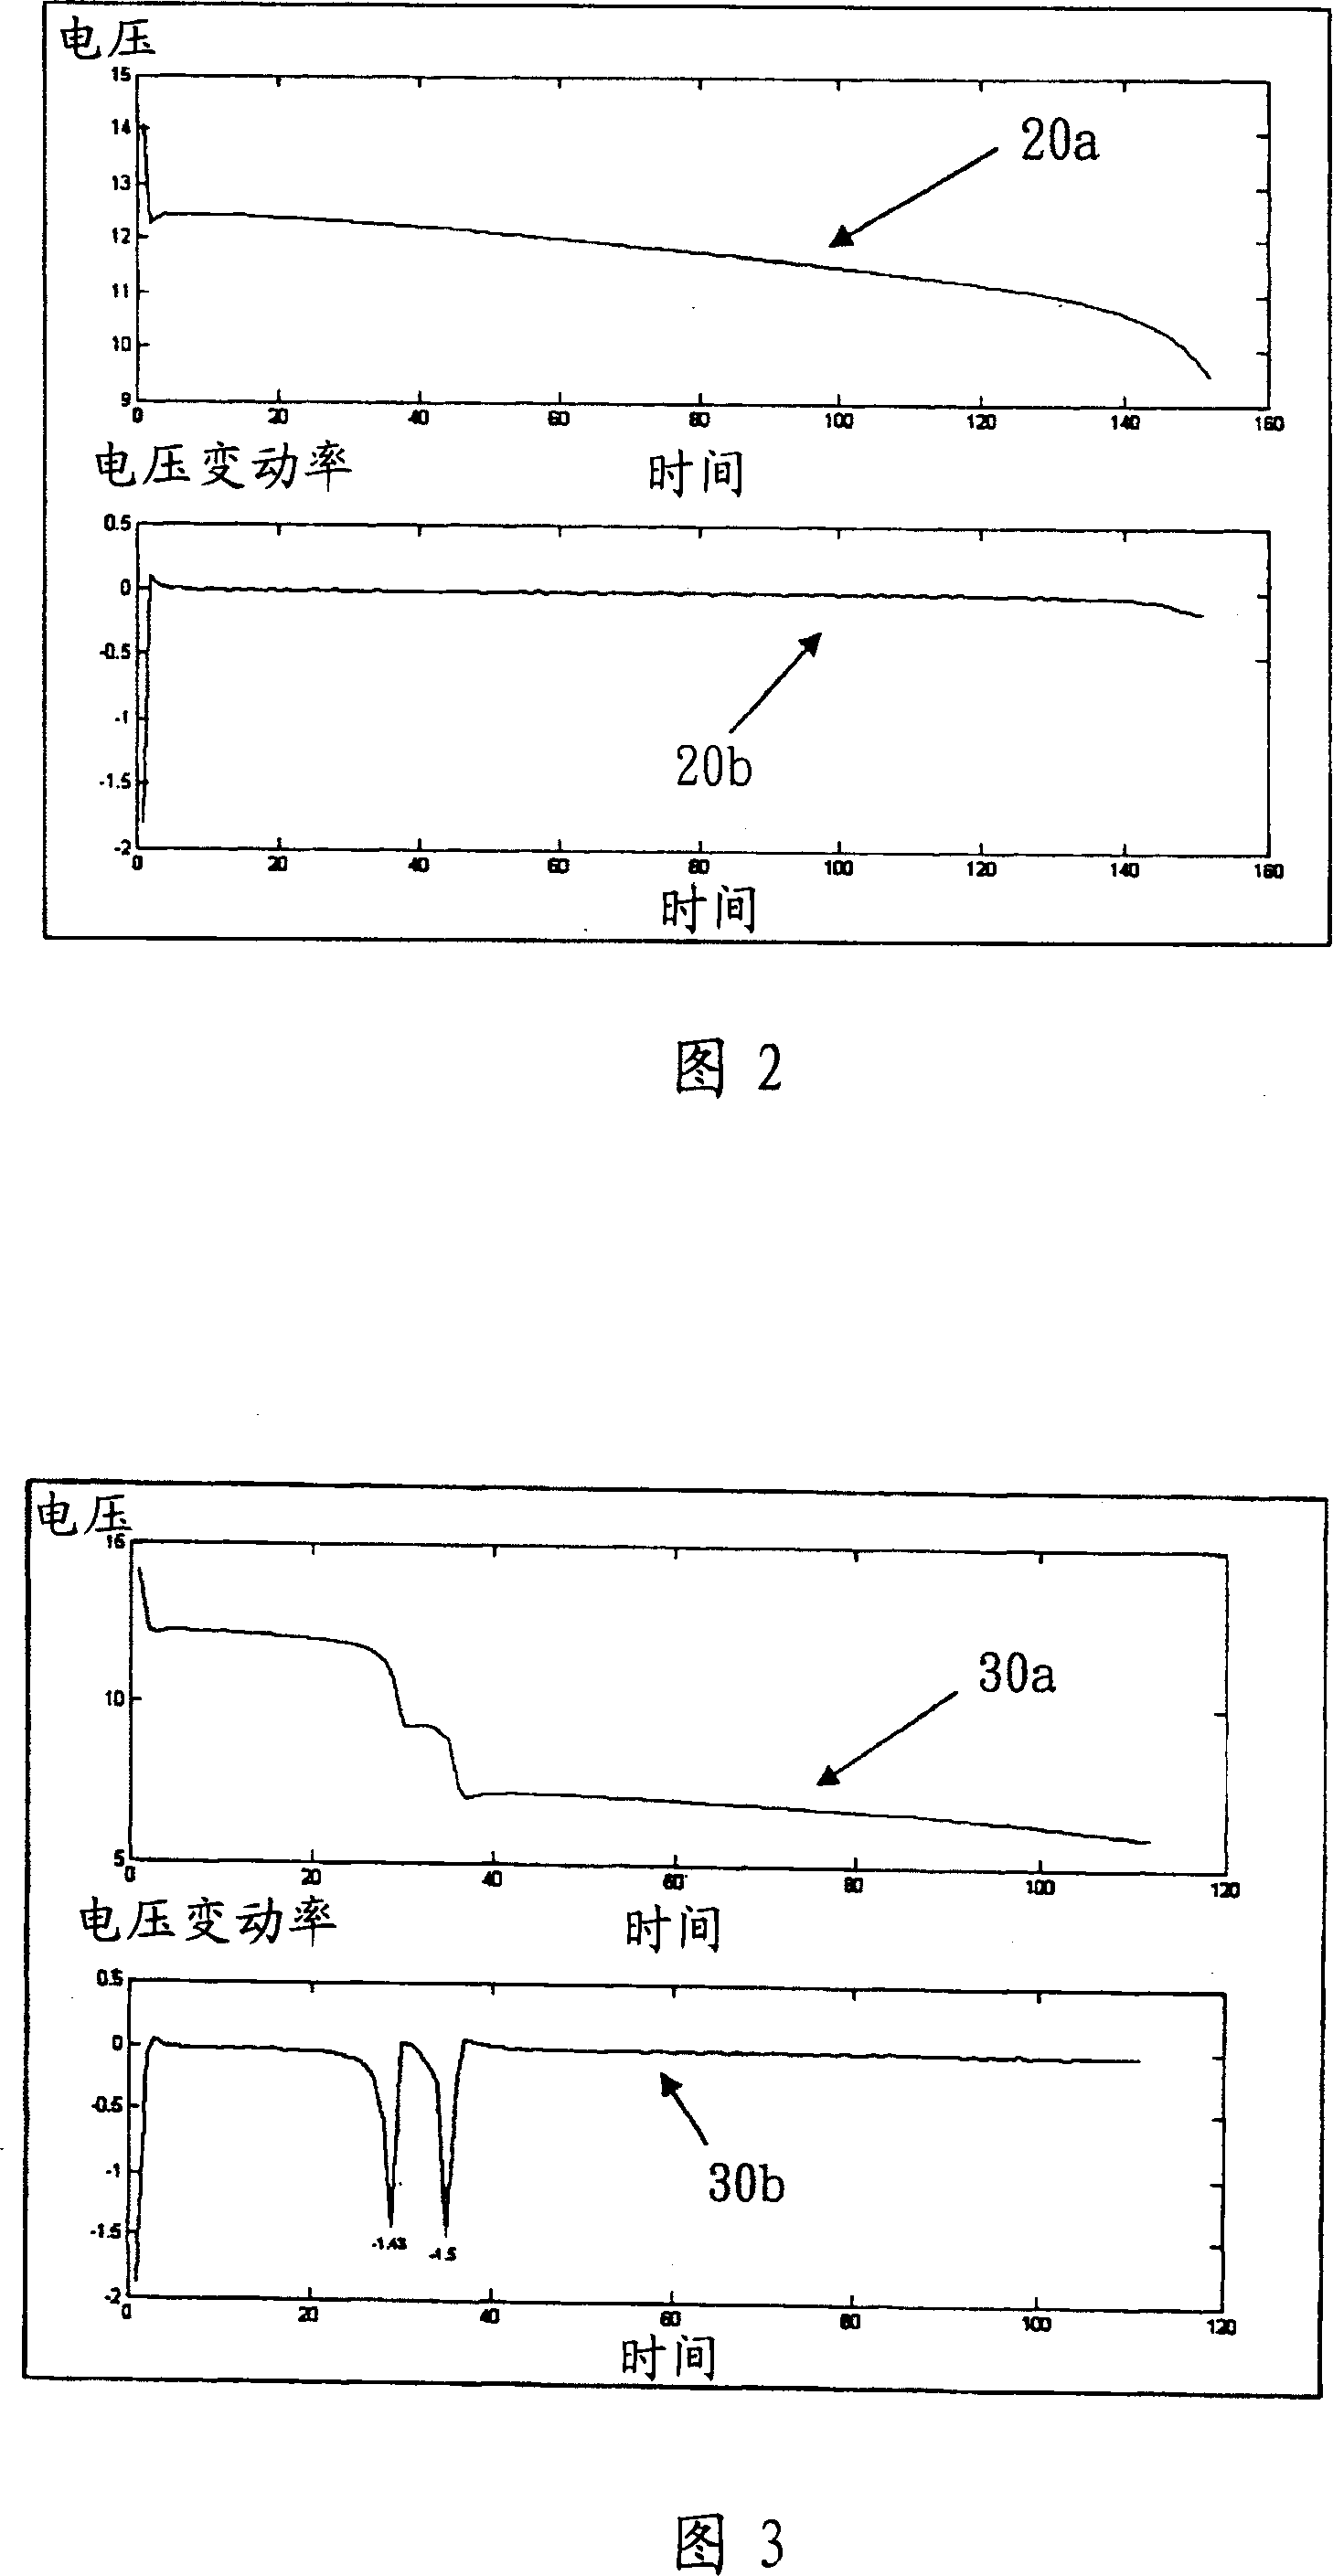 Cell health state diagnosis method